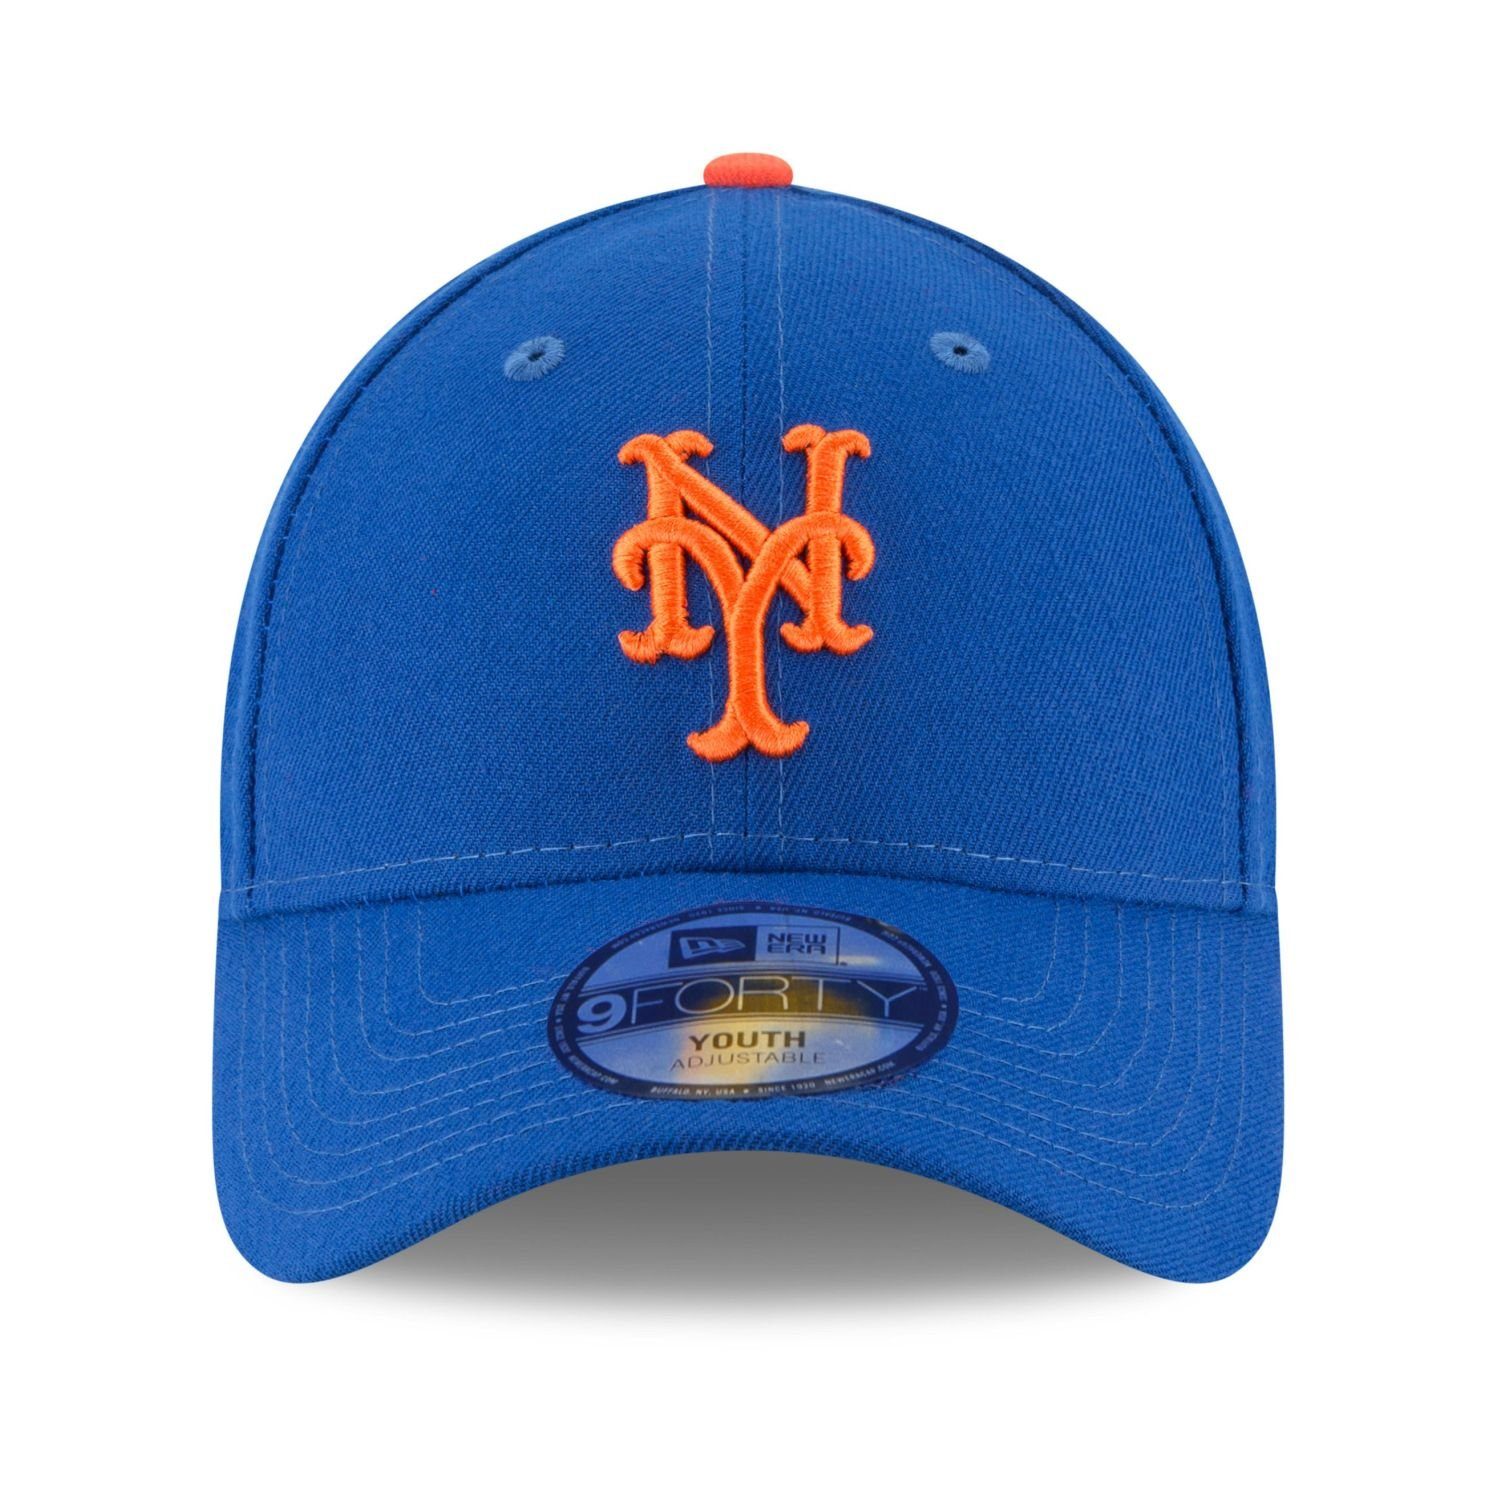 Baseball Mets Cap 9Forty York New New LEAGUE Era Youth